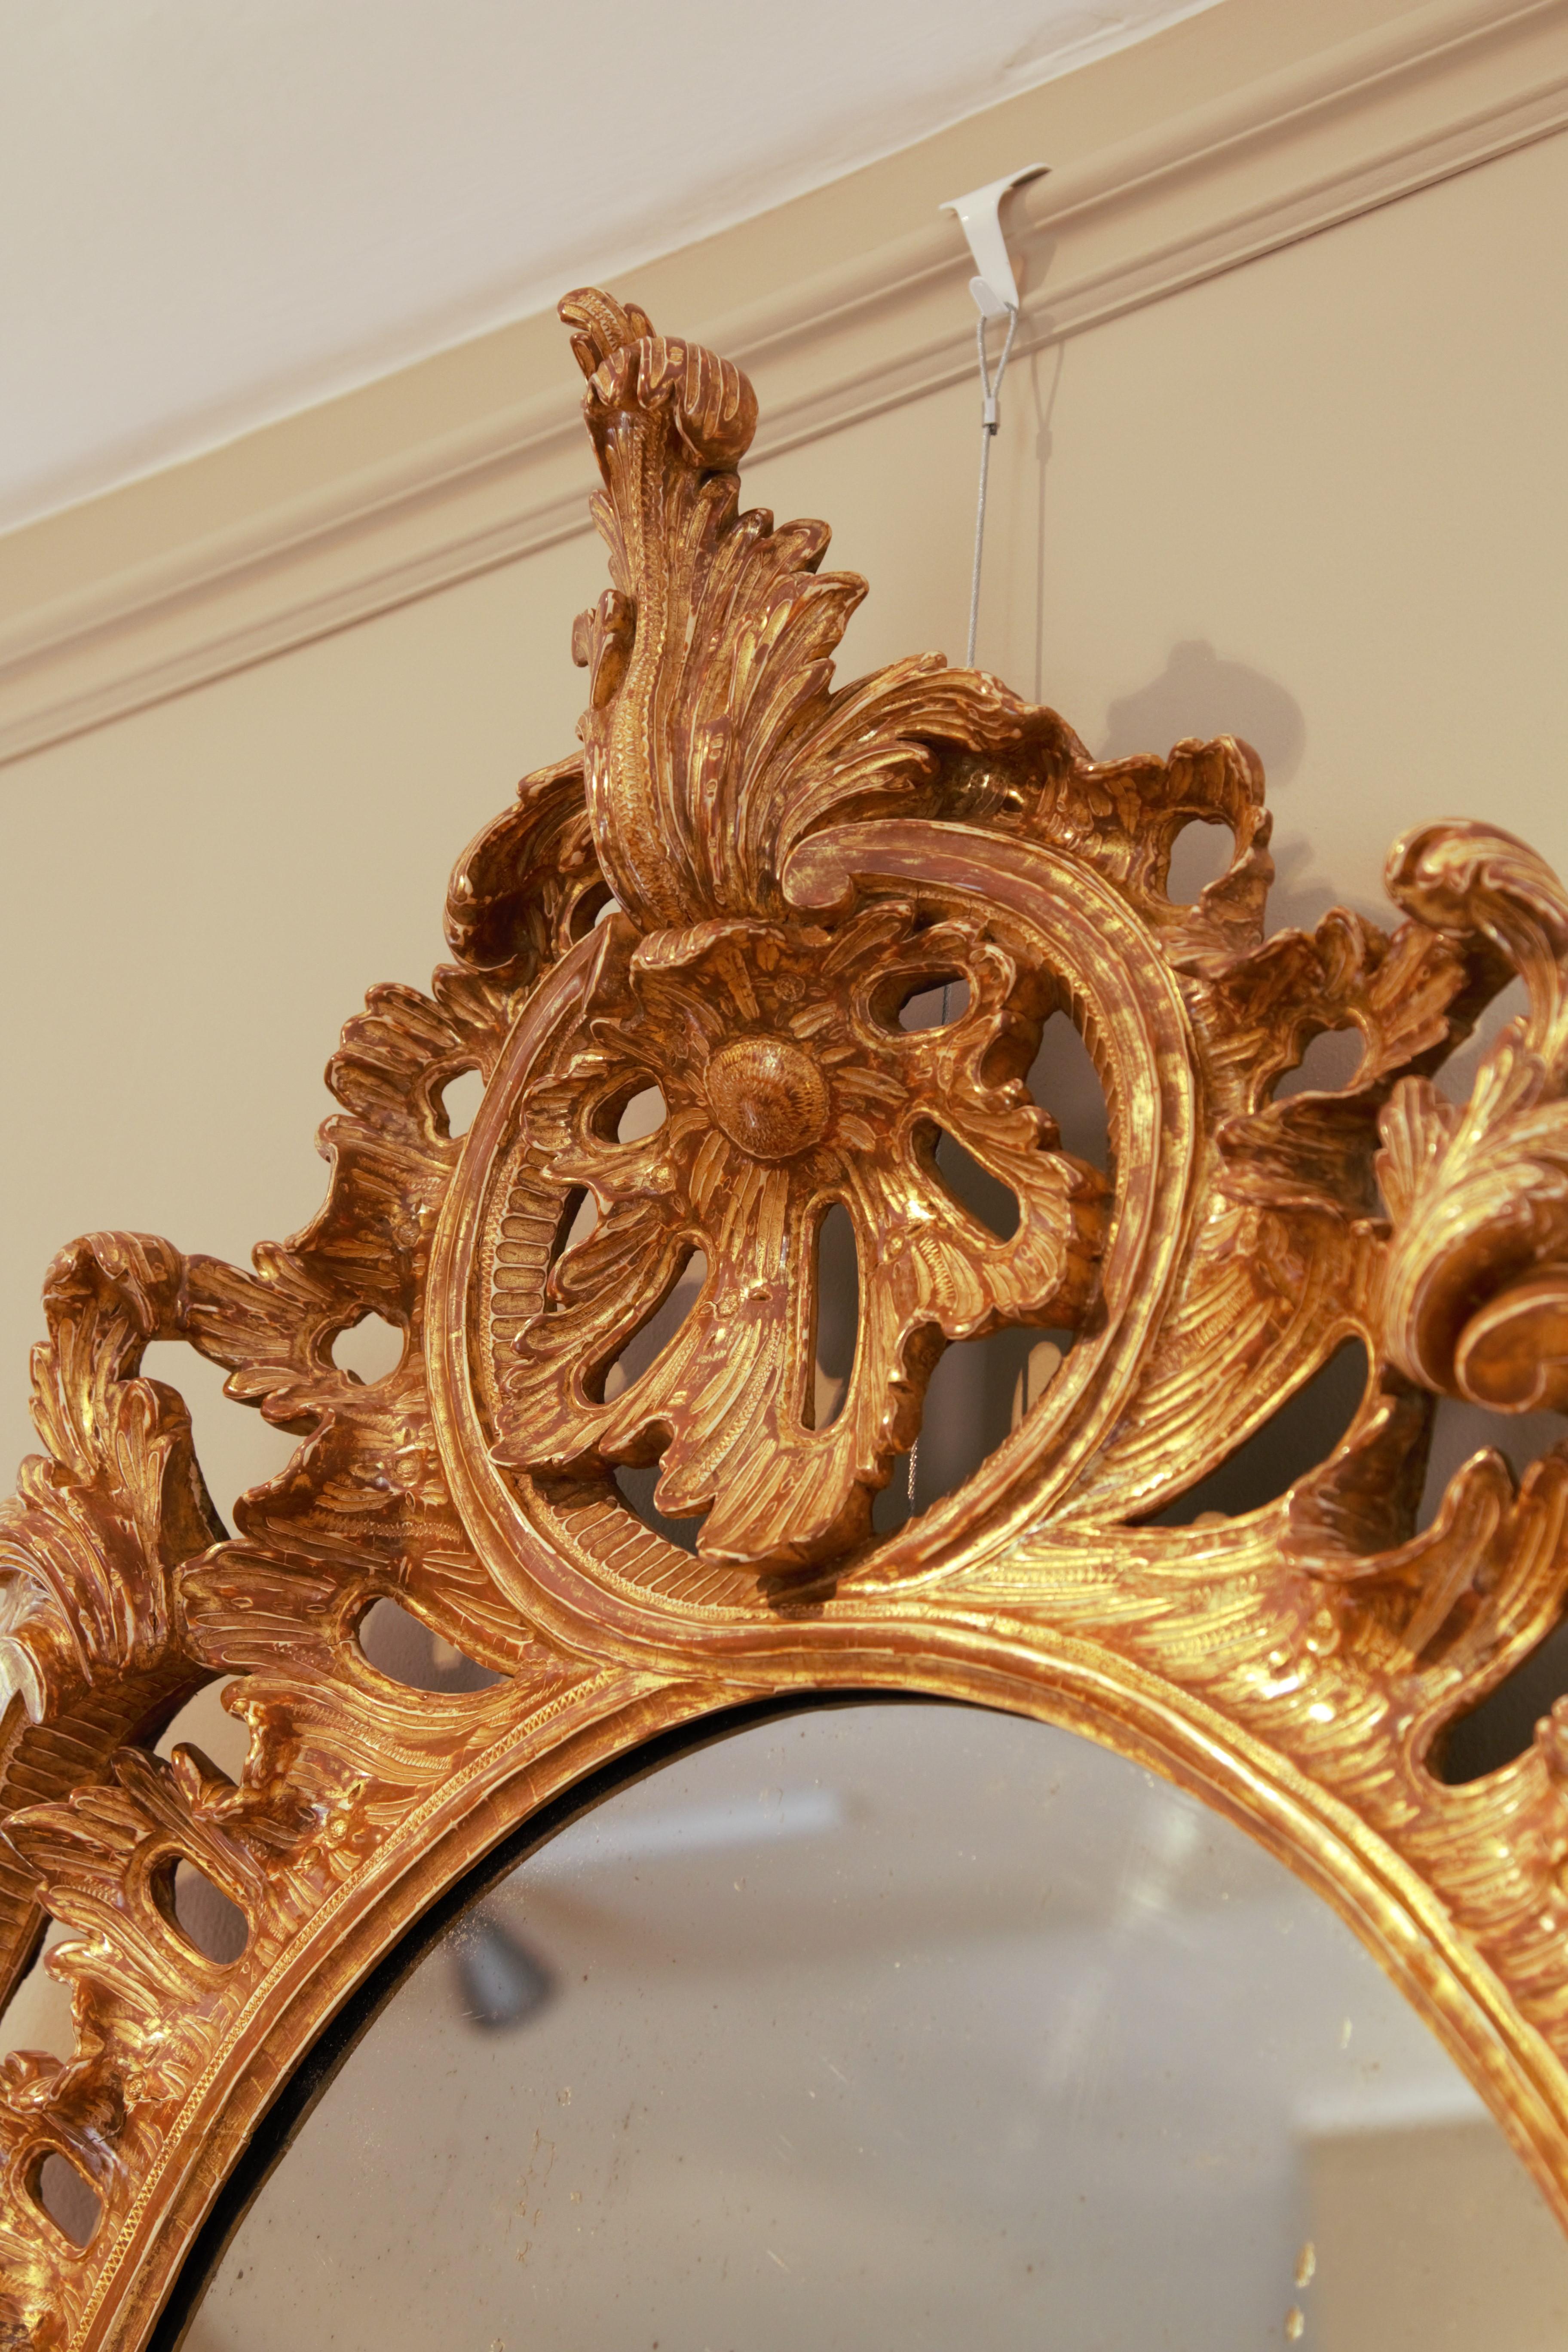 A fine 18th Century rococo wall mirror, the frame with pierced border with C
scrolls and foliate palm and acanthus leaf details.

From the first half of the 18th Century, designs in furniture and interiors
became much more varied and elaborate,